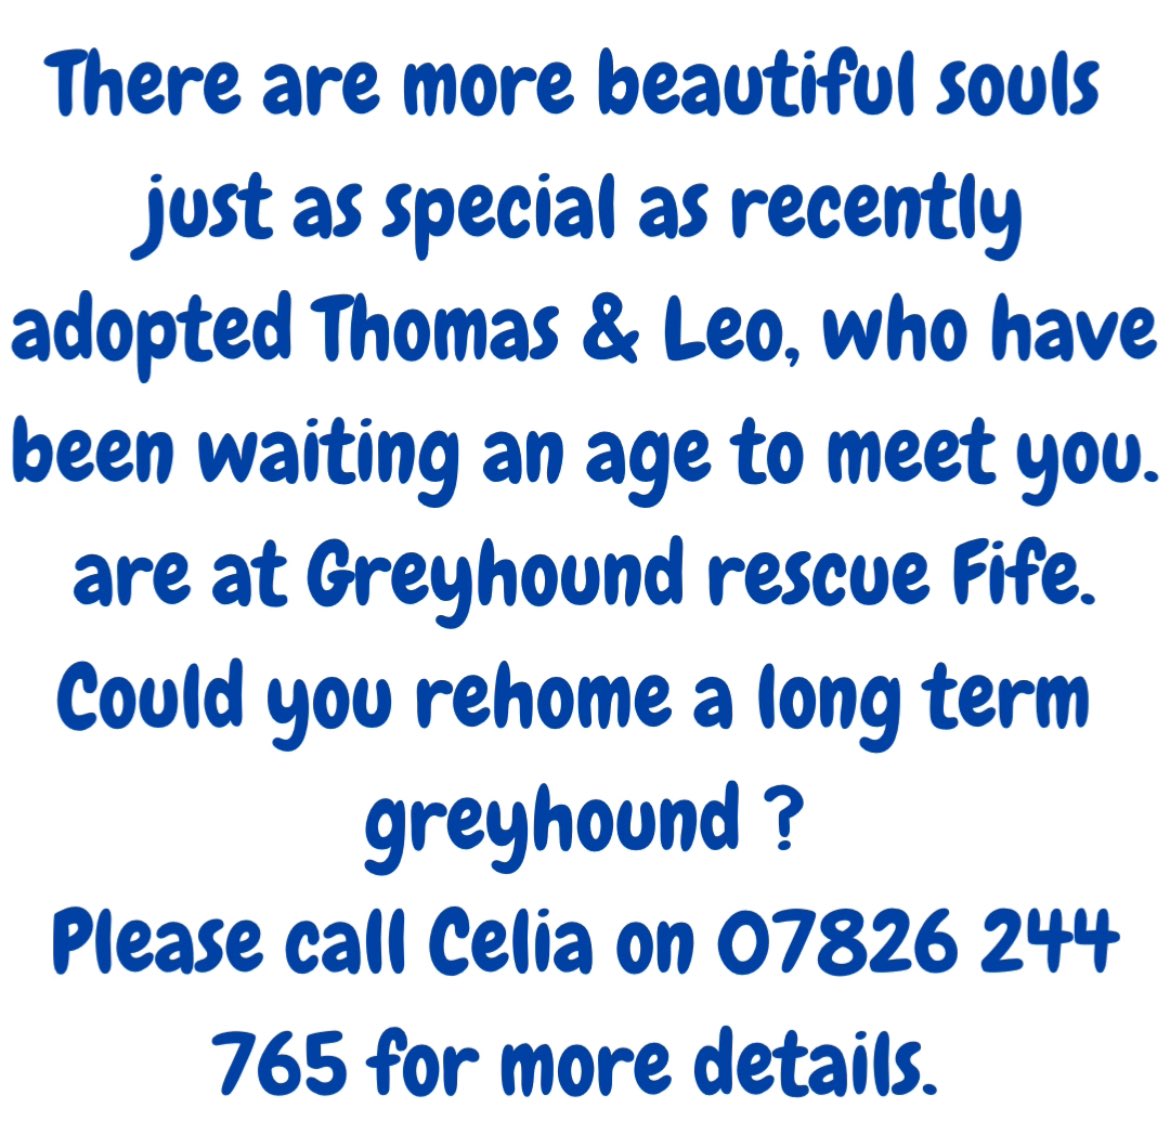 We never give up on GRF #Greyhounds waiting for a home.Long termer’s Thomas & Leo both found adopters who took a chance on them. Now it’s Bob, Matt,Netty, Reece, Ruby & Scouts turn.All beautiful souls waiting over a yr in rescue. Take a chance, please ☎️Celia #forgottensoulshour